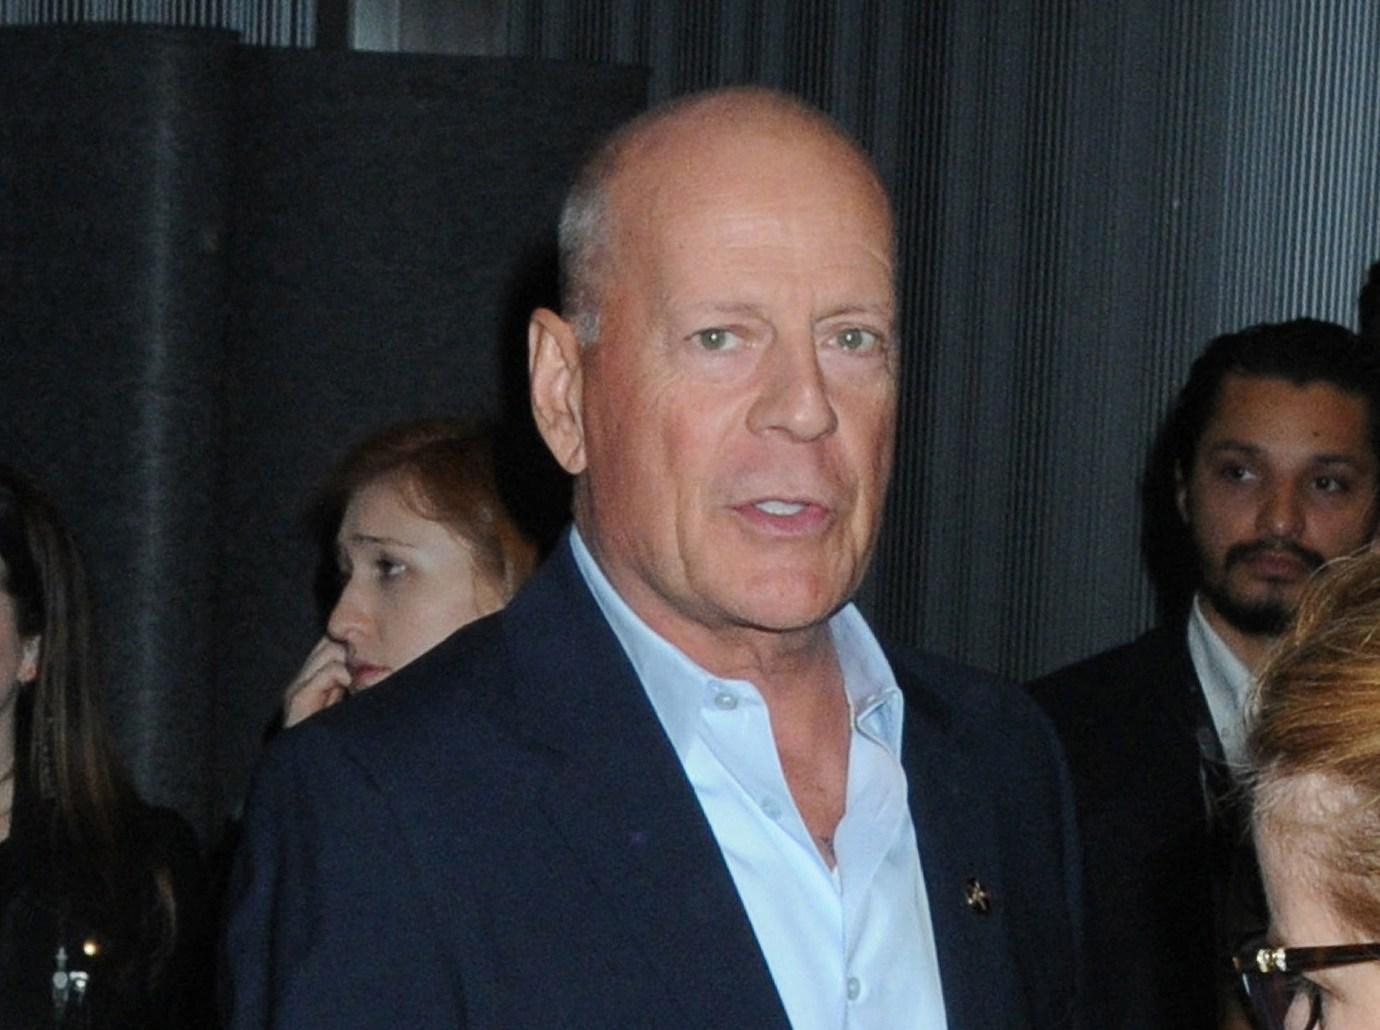 Bruce Willis' Family Determined To Make Christmas 'Special' For Him